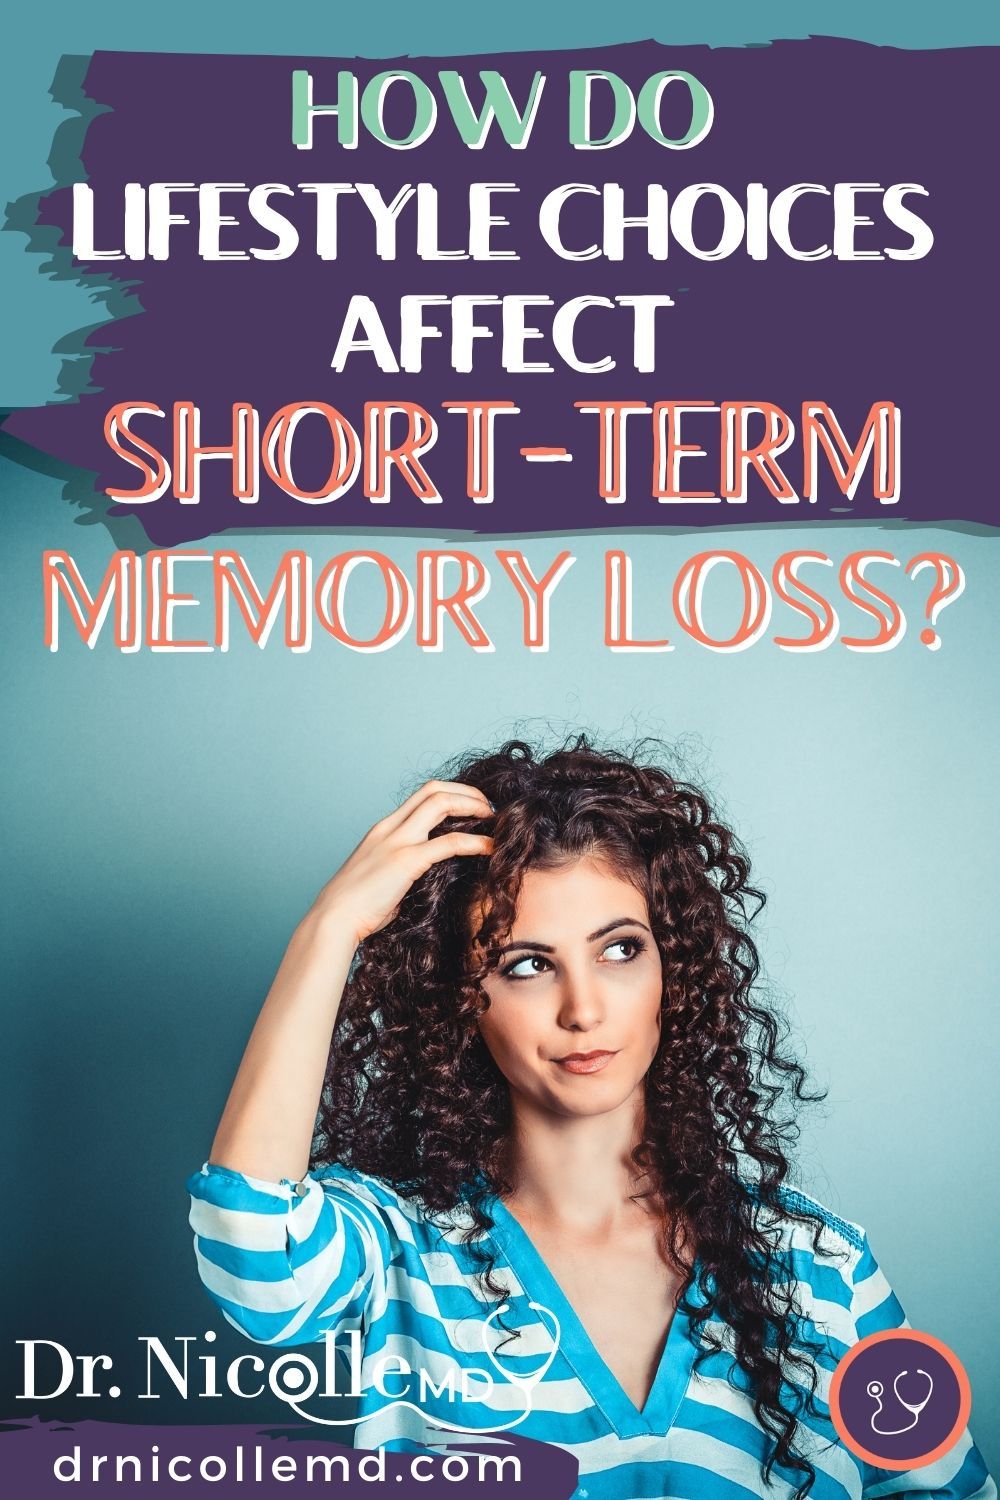 How Do Lifestyle Choices Affect Short-Term Memory Loss?